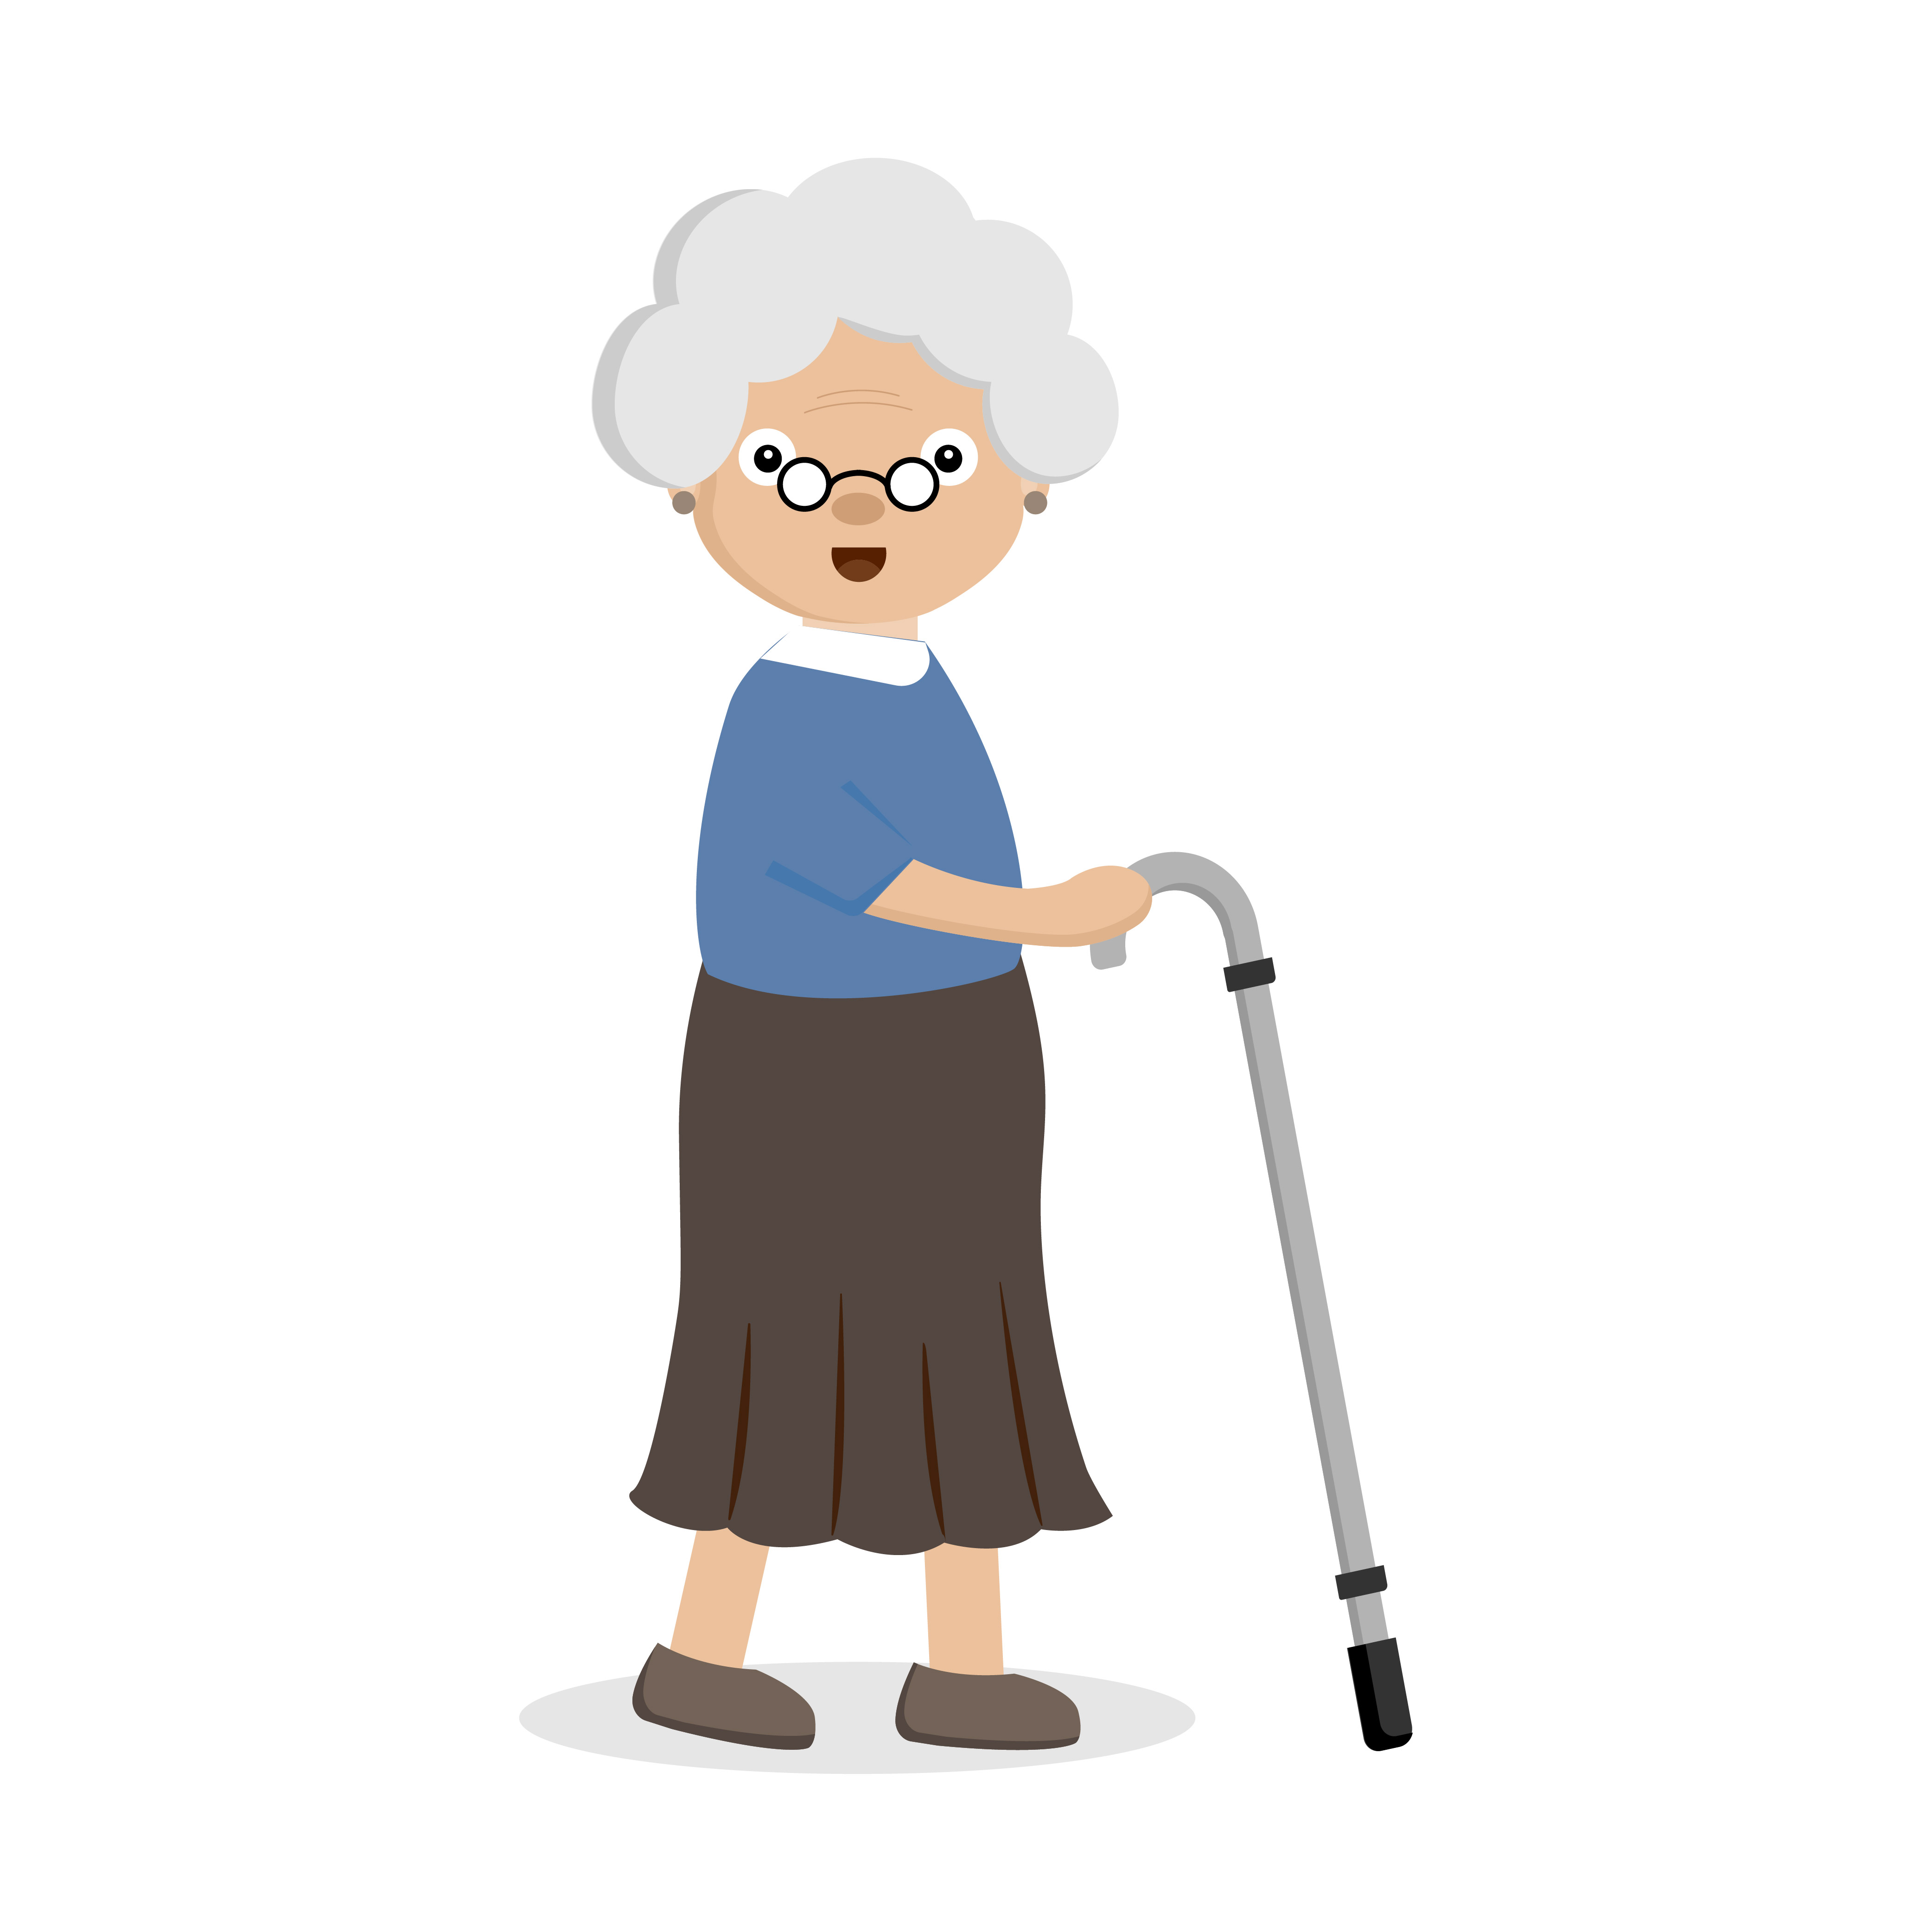 Download Old woman with a cane. 580893 - Download Free Vectors, Clipart Graphics & Vector Art